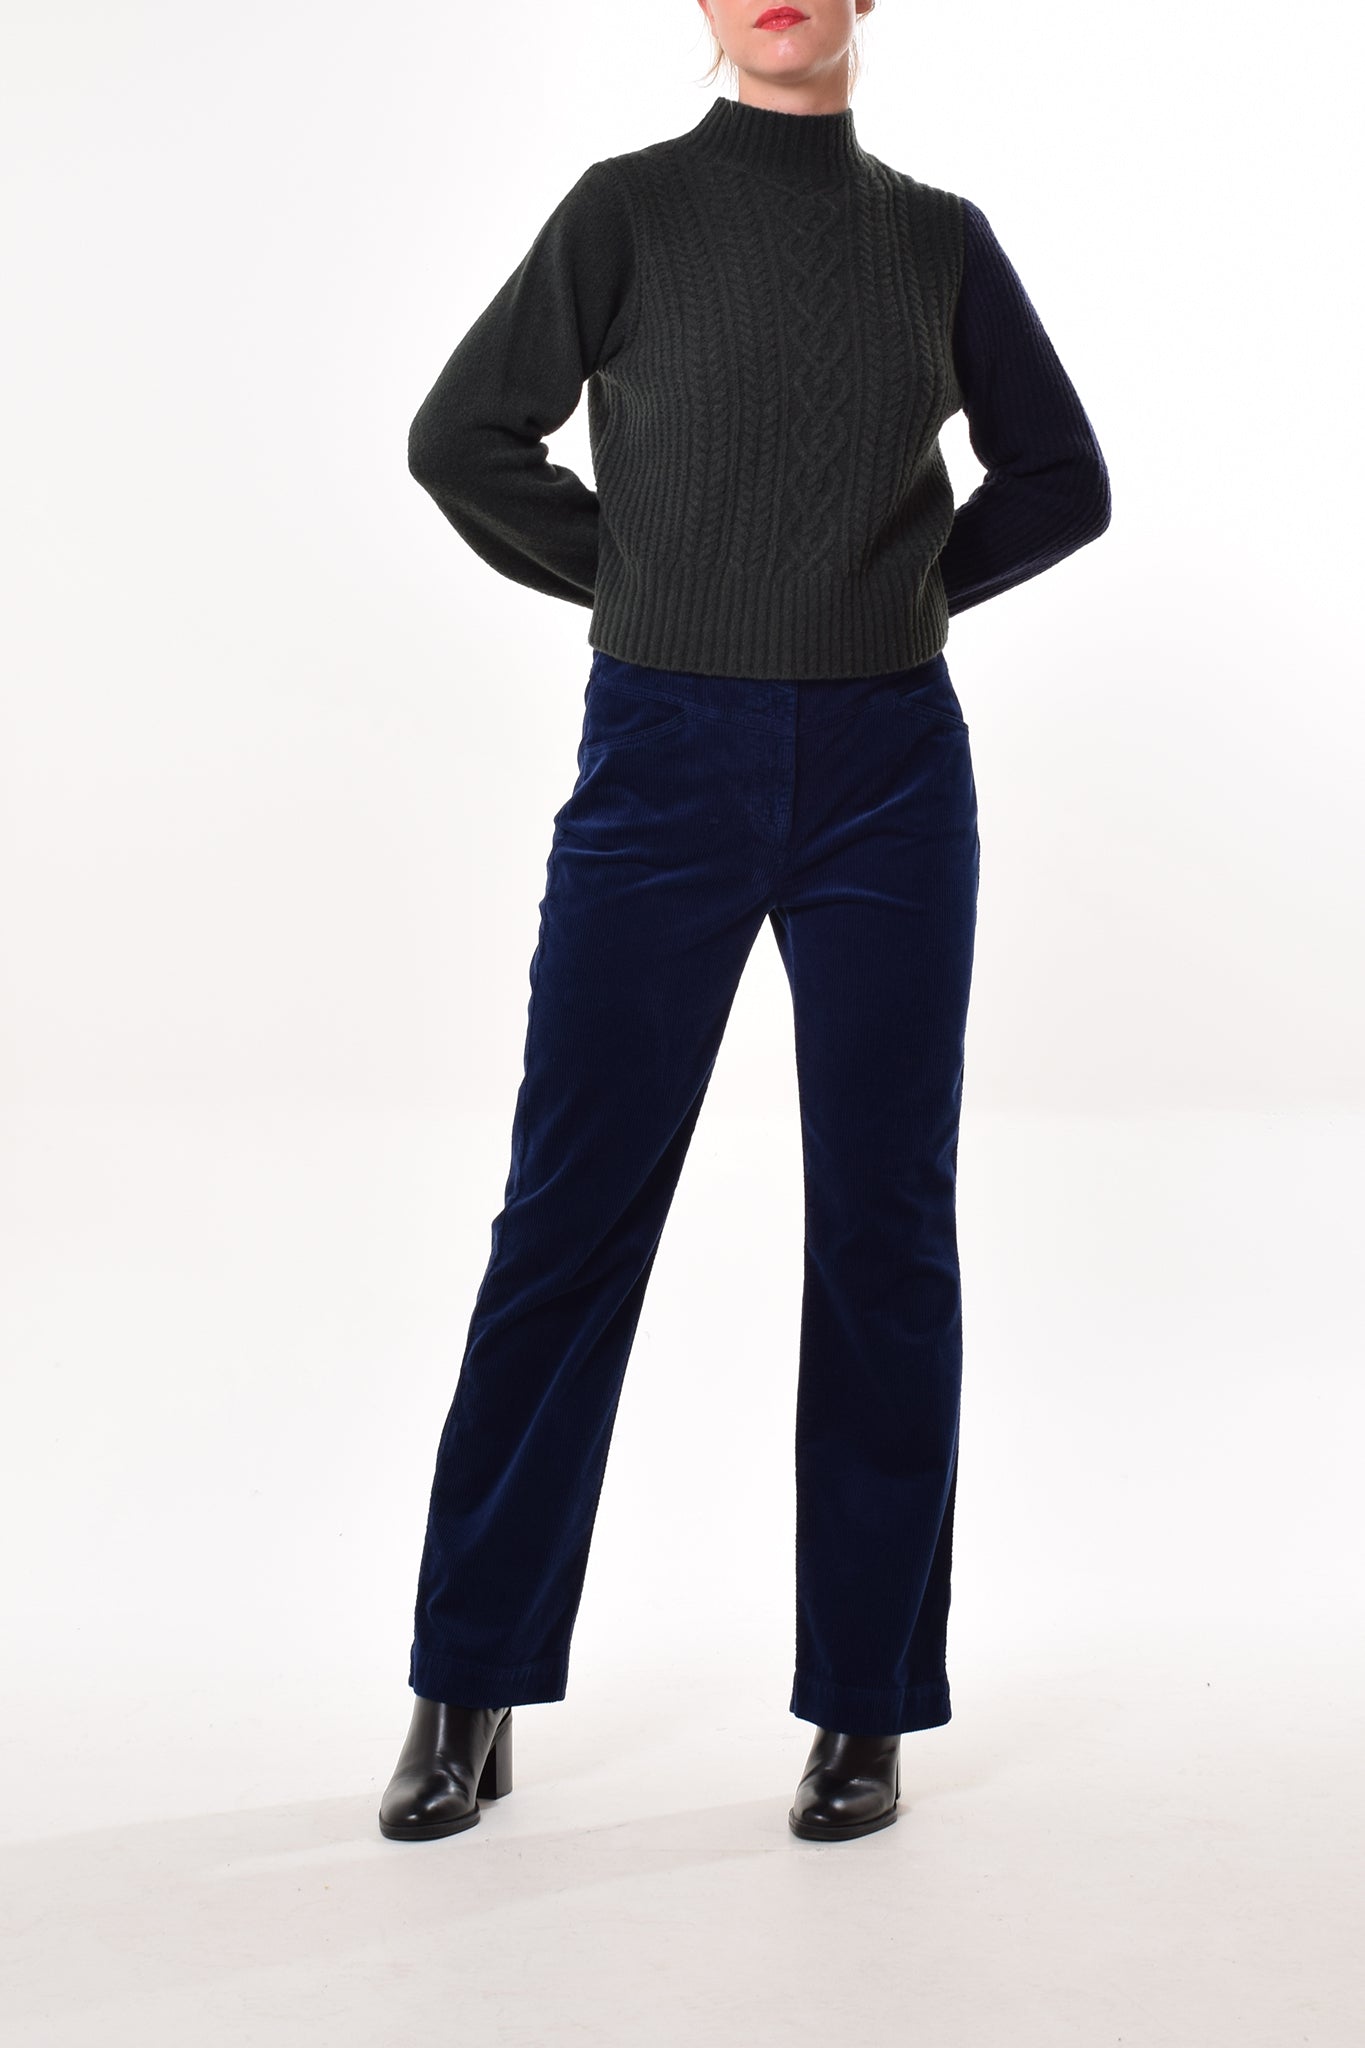 City trousers in Midnight (big cotton corduroy)